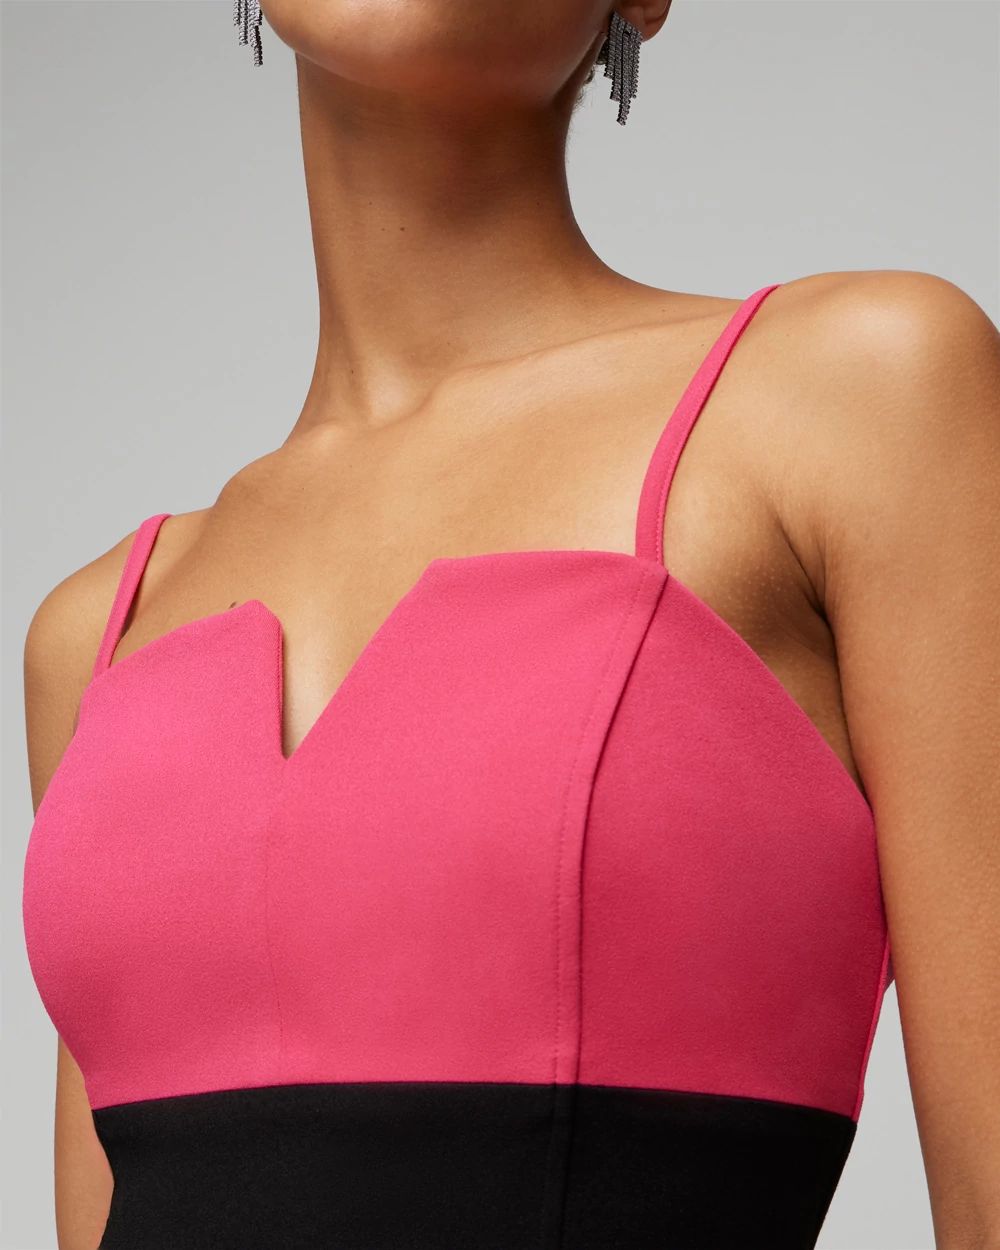 Strapless Colorblock Tuxedo Mini Dress click to view larger image.